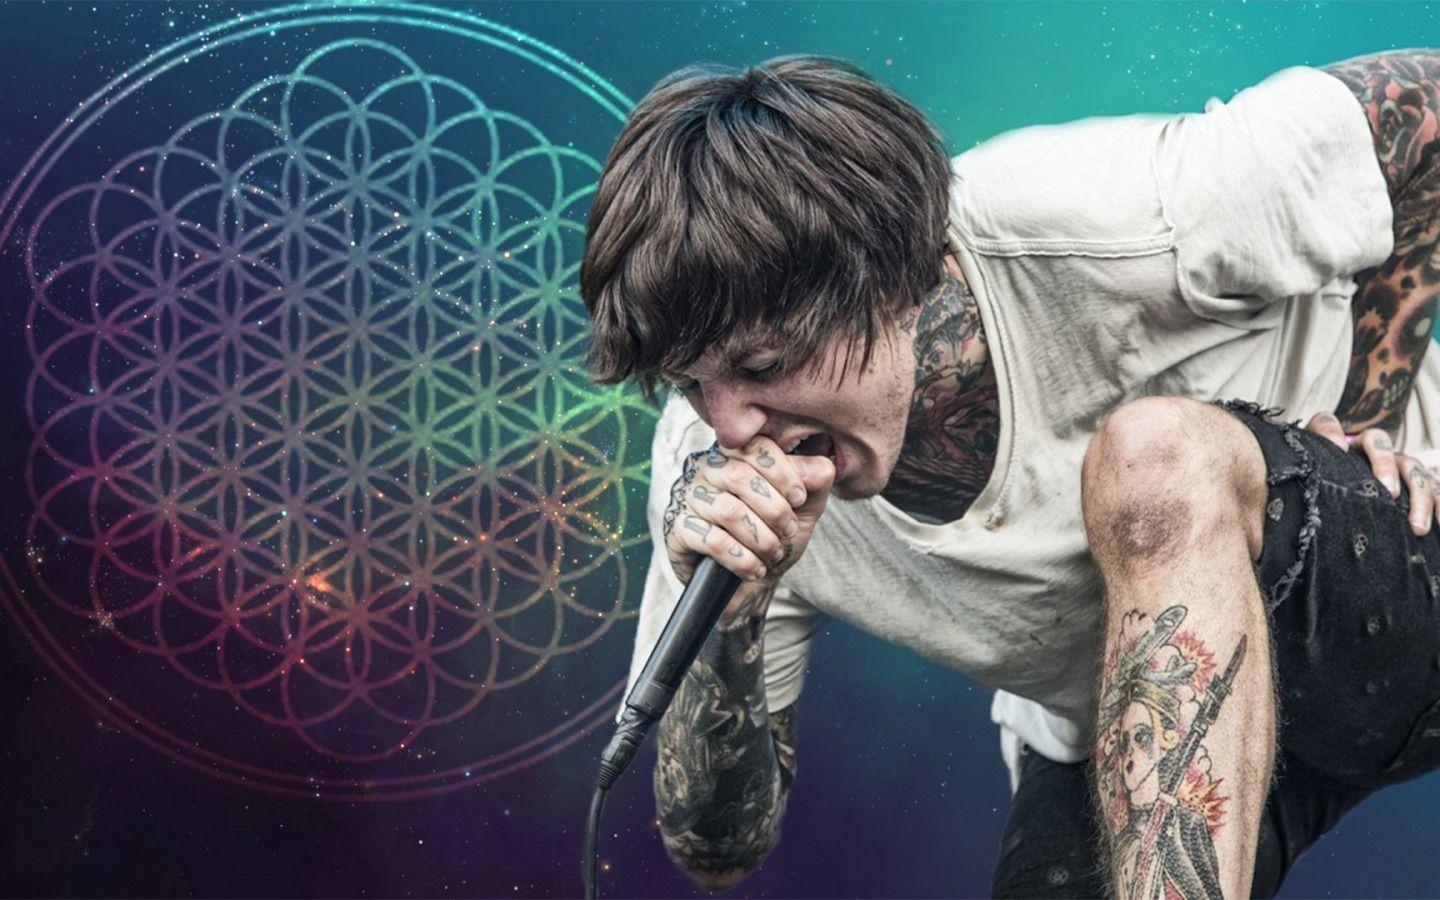 Download Wallpaper space, Oliver Sykes, space, Bring me